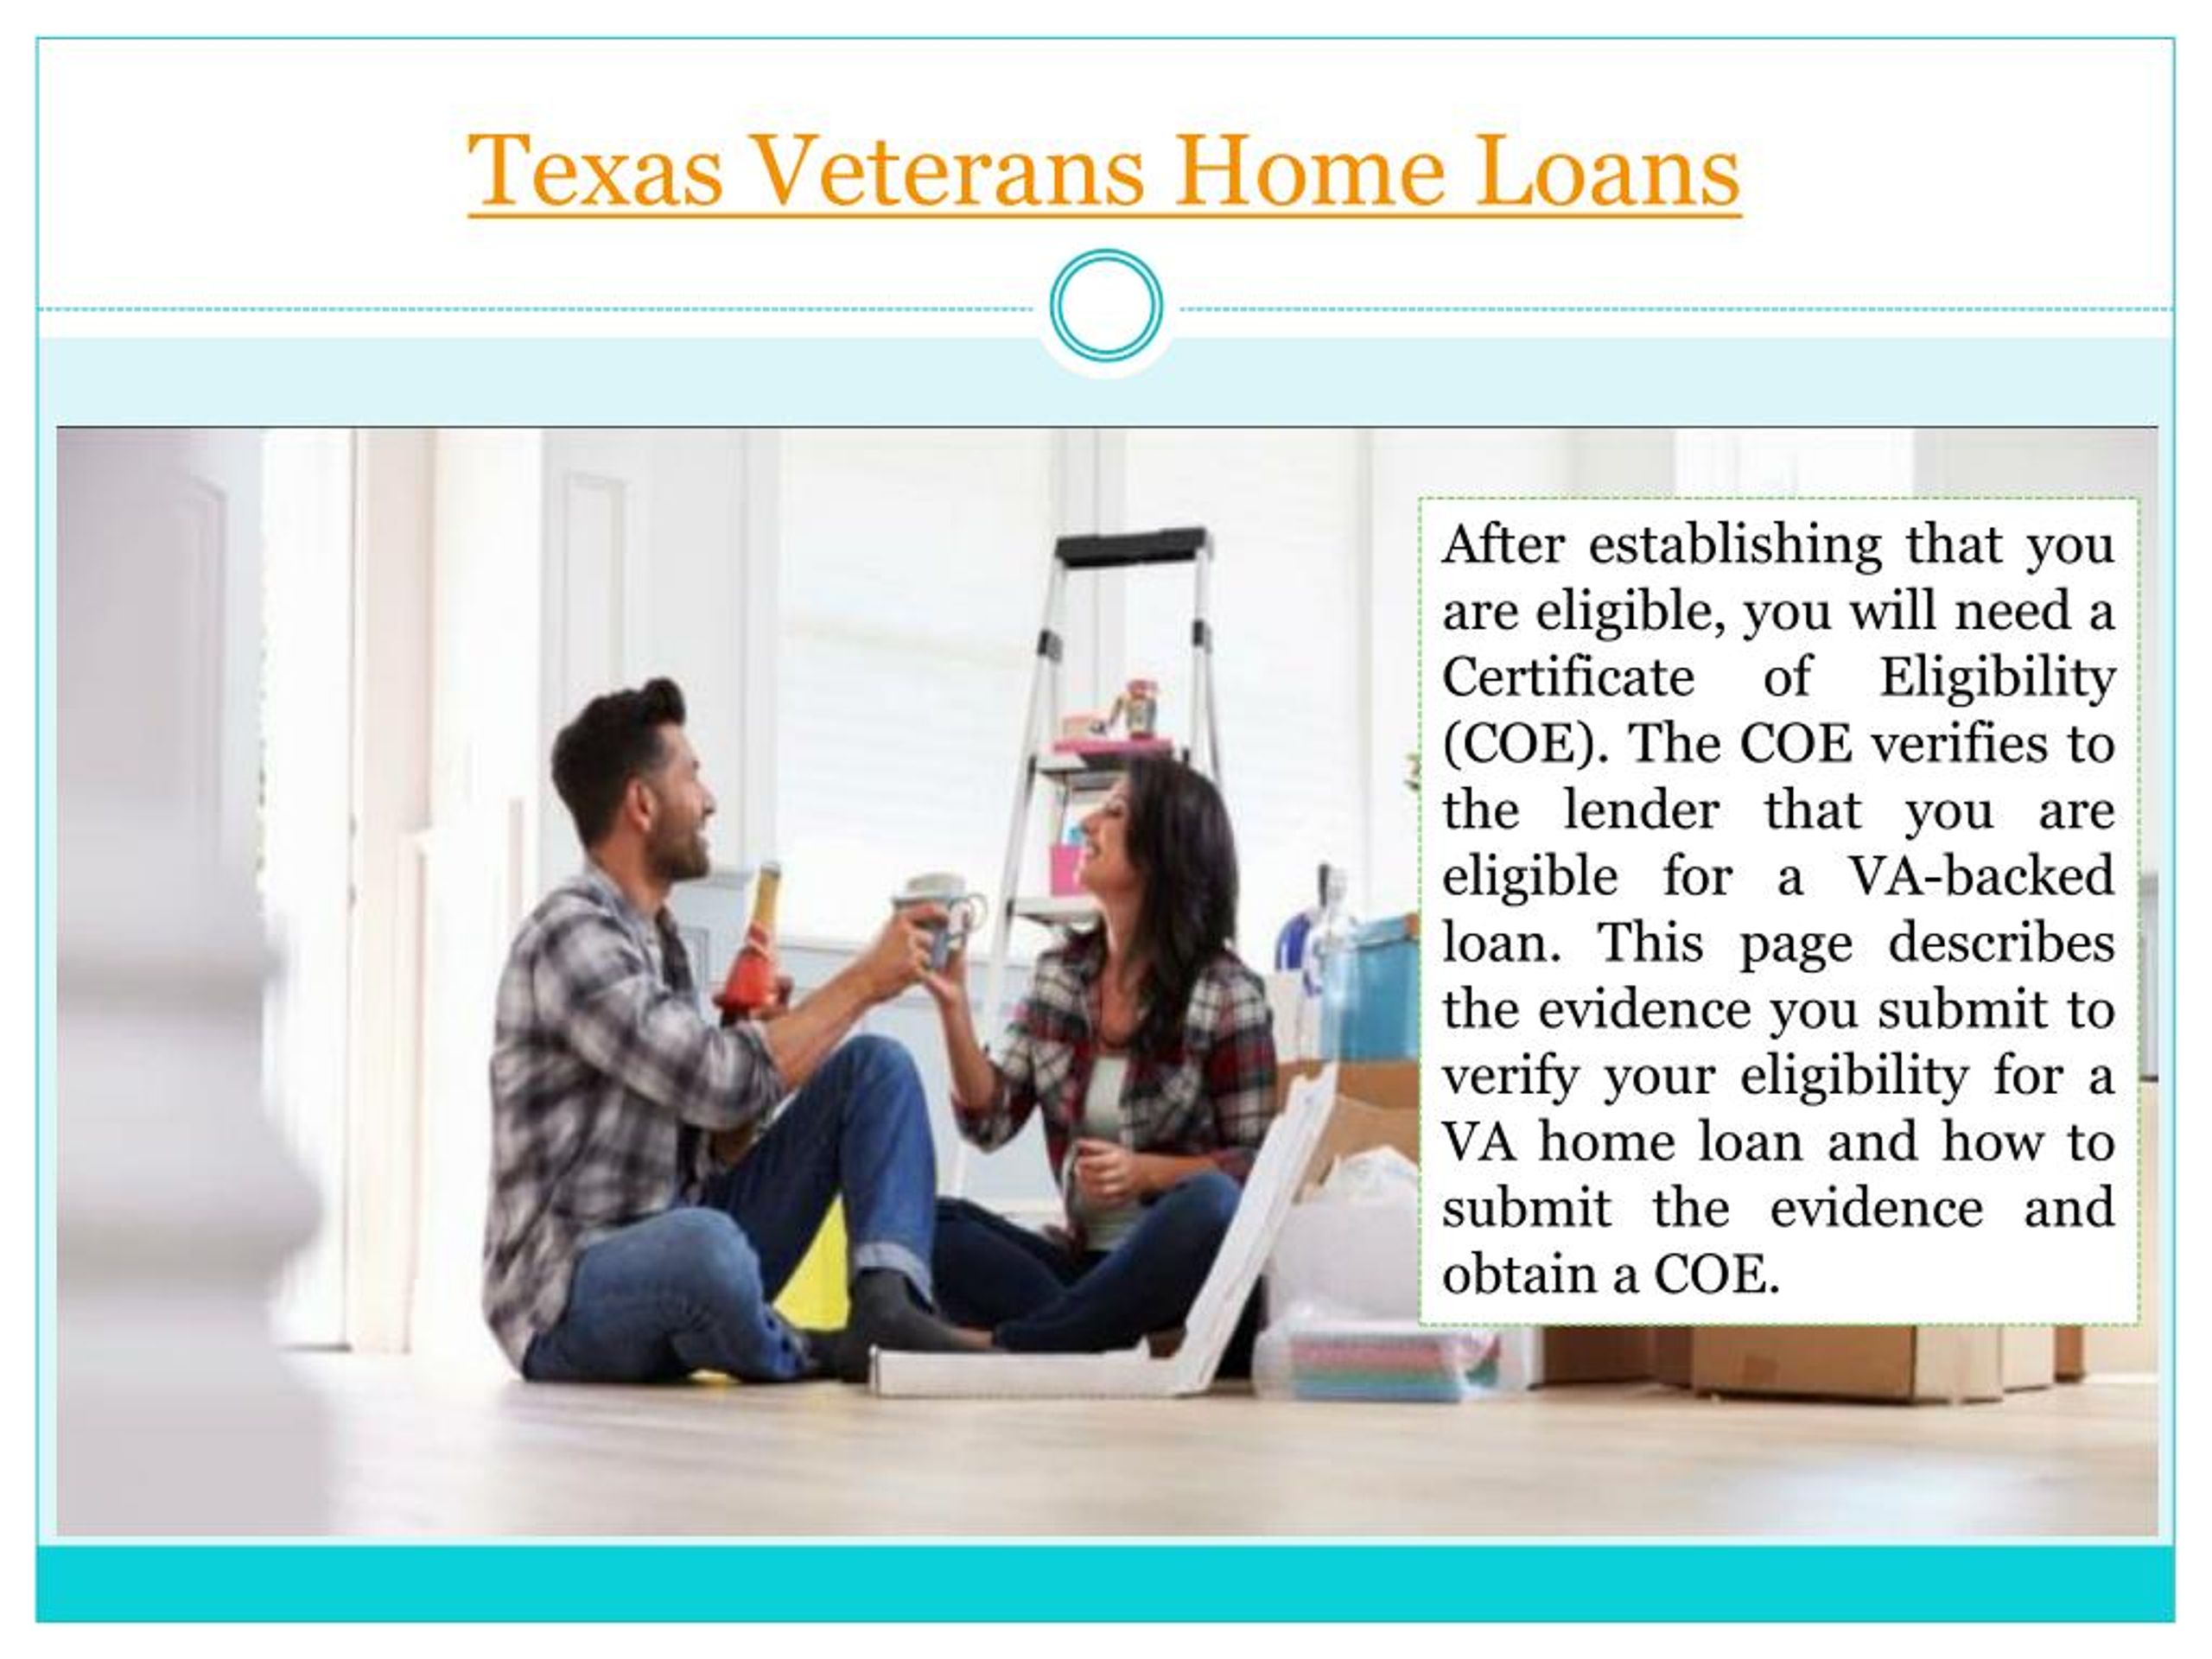 PPT Texas Veterans Home Loans PowerPoint Presentation, free download ID7416061